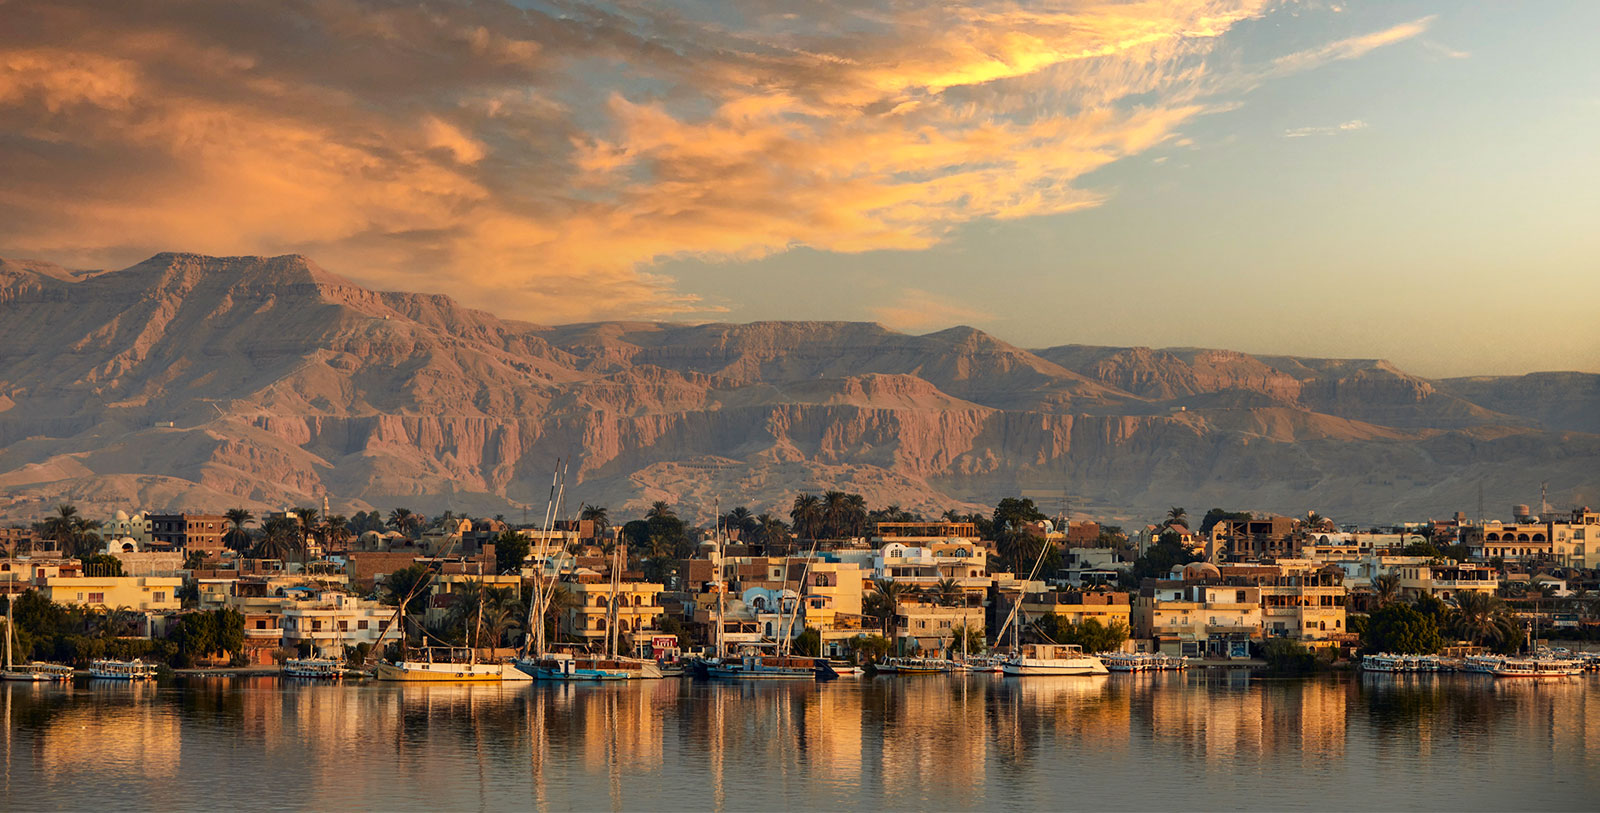 Explore the Valley of the Kings on the West Bank of the Nile opposite Luxor.